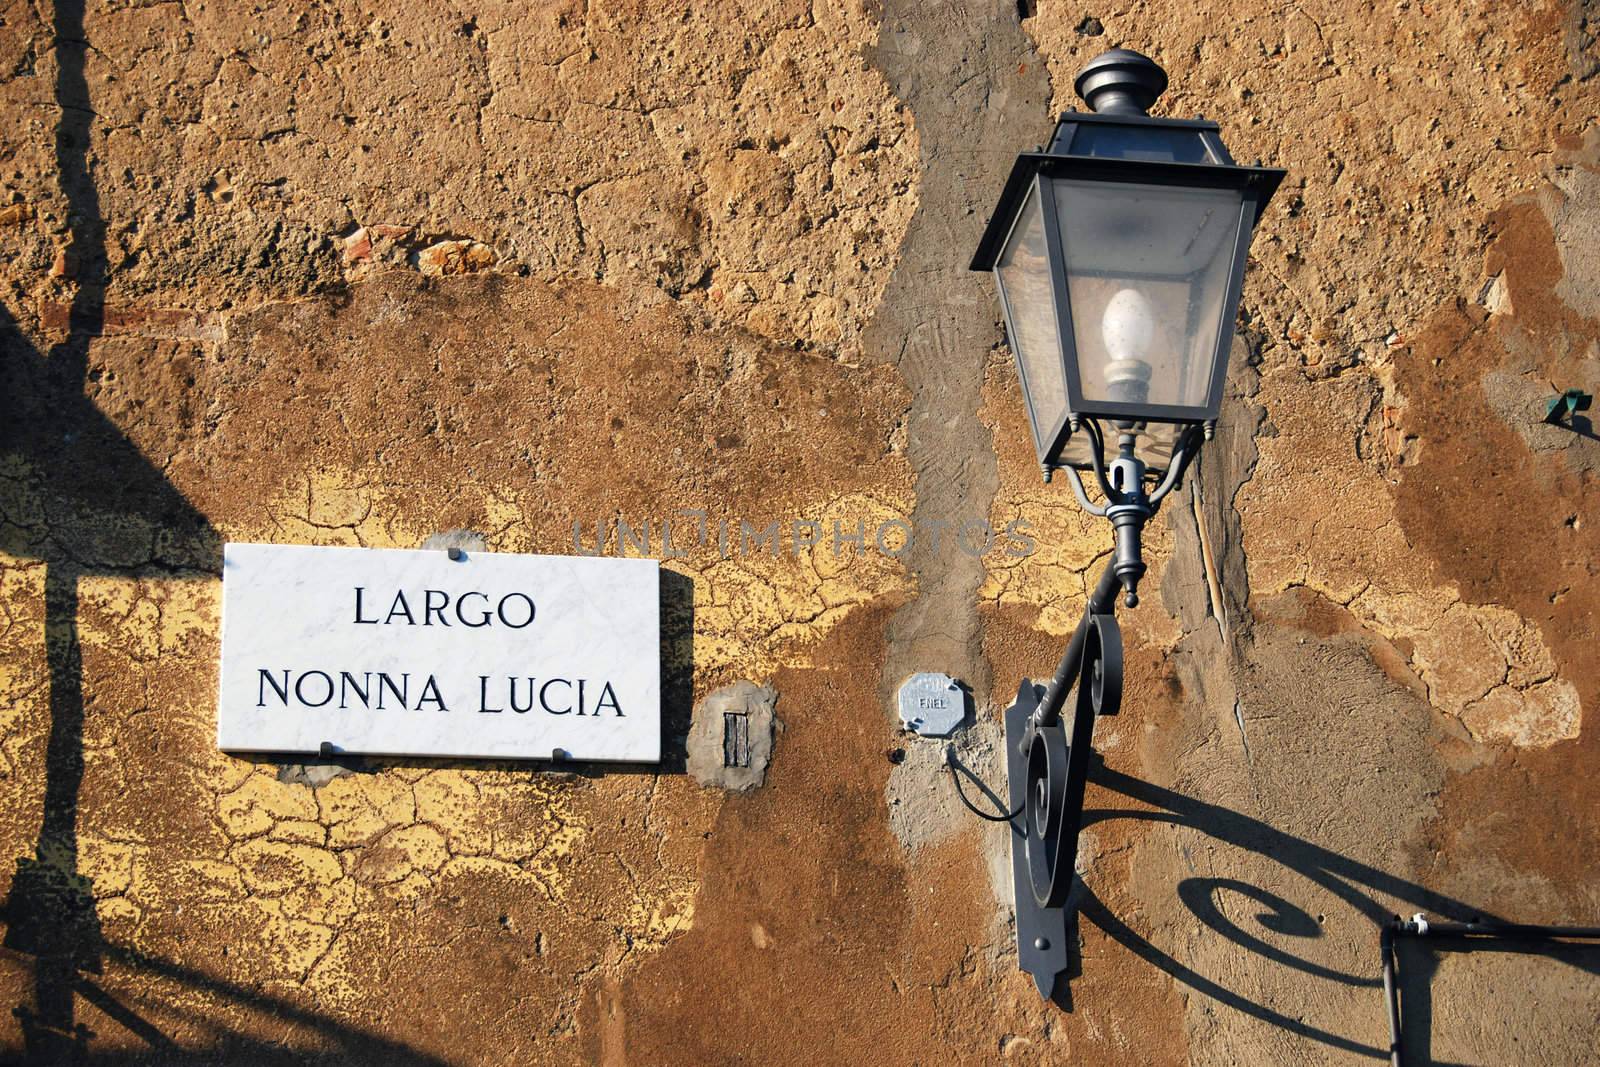 Small Street Signs, Bolgheri, Tuscany, March 2007 by jovannig